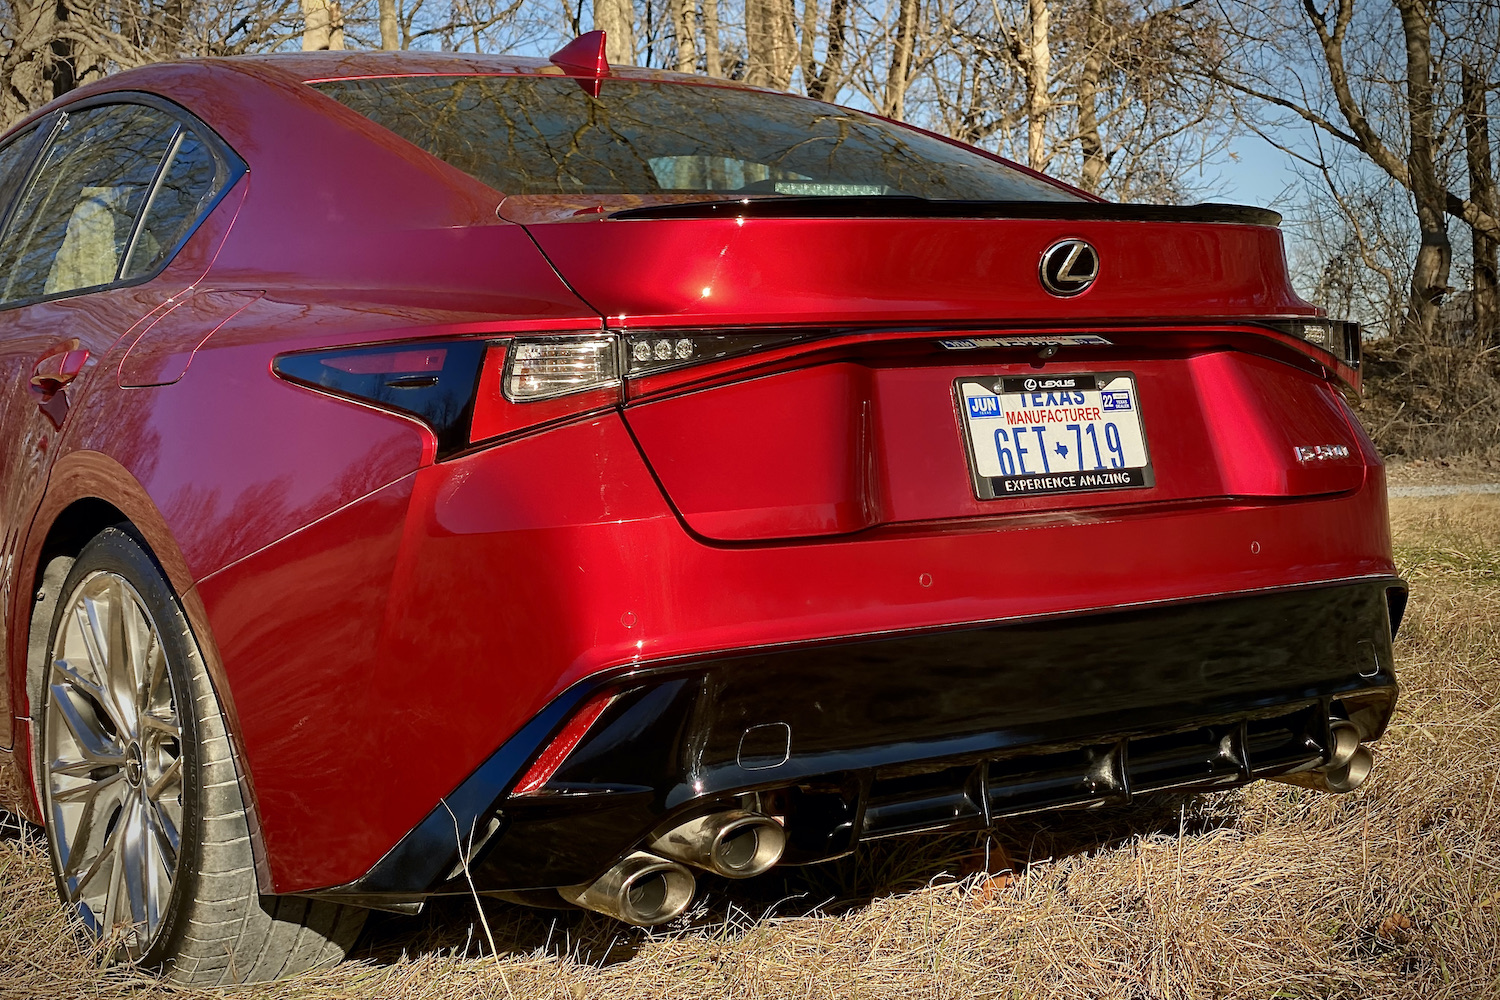 Lexus IS 500 rear end close up angle from driver's side in a grassy field.